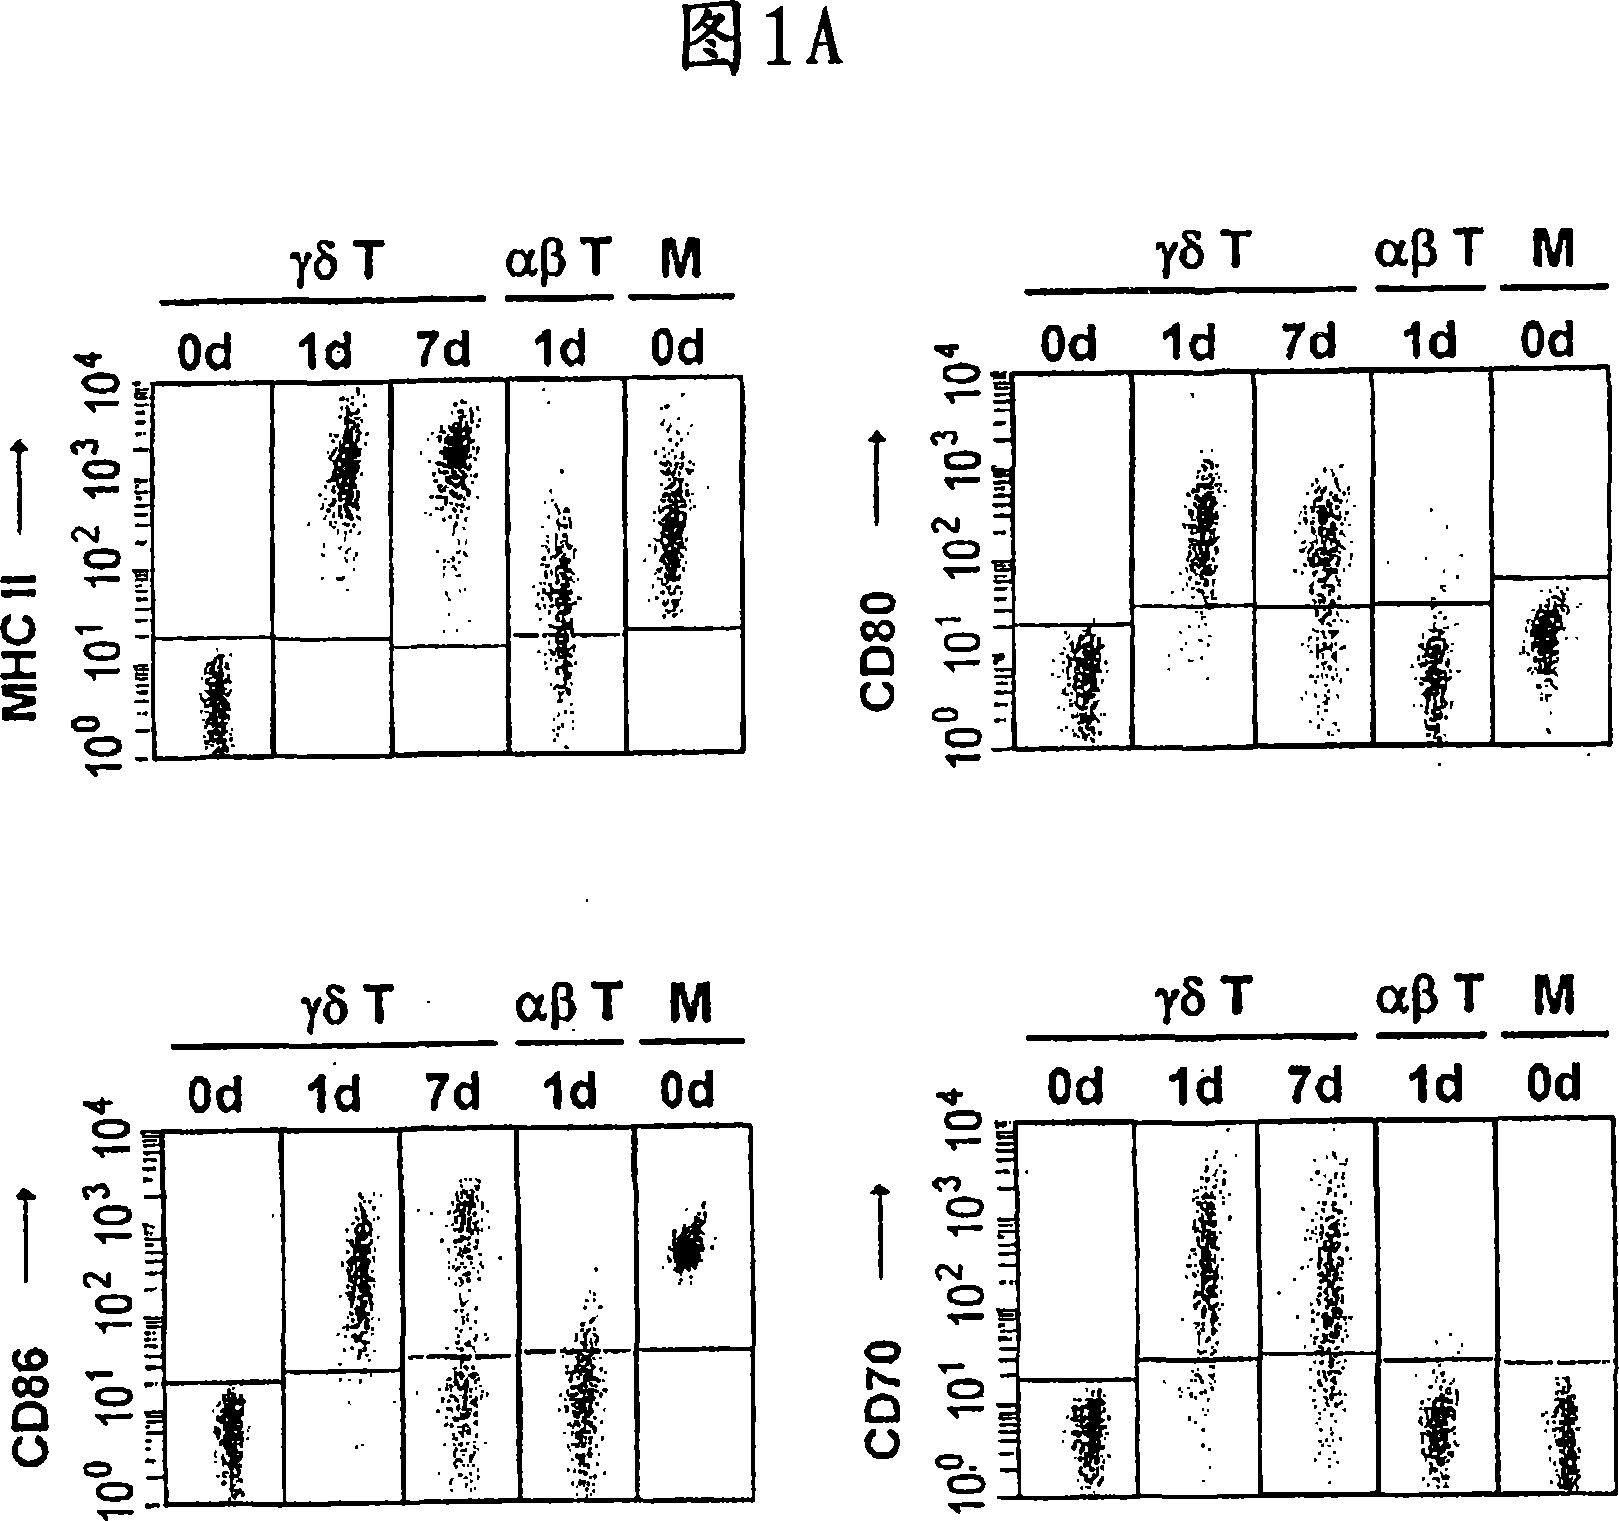 Preparation of antigen-presenting human gamma delta t cells and use in immunotherapy